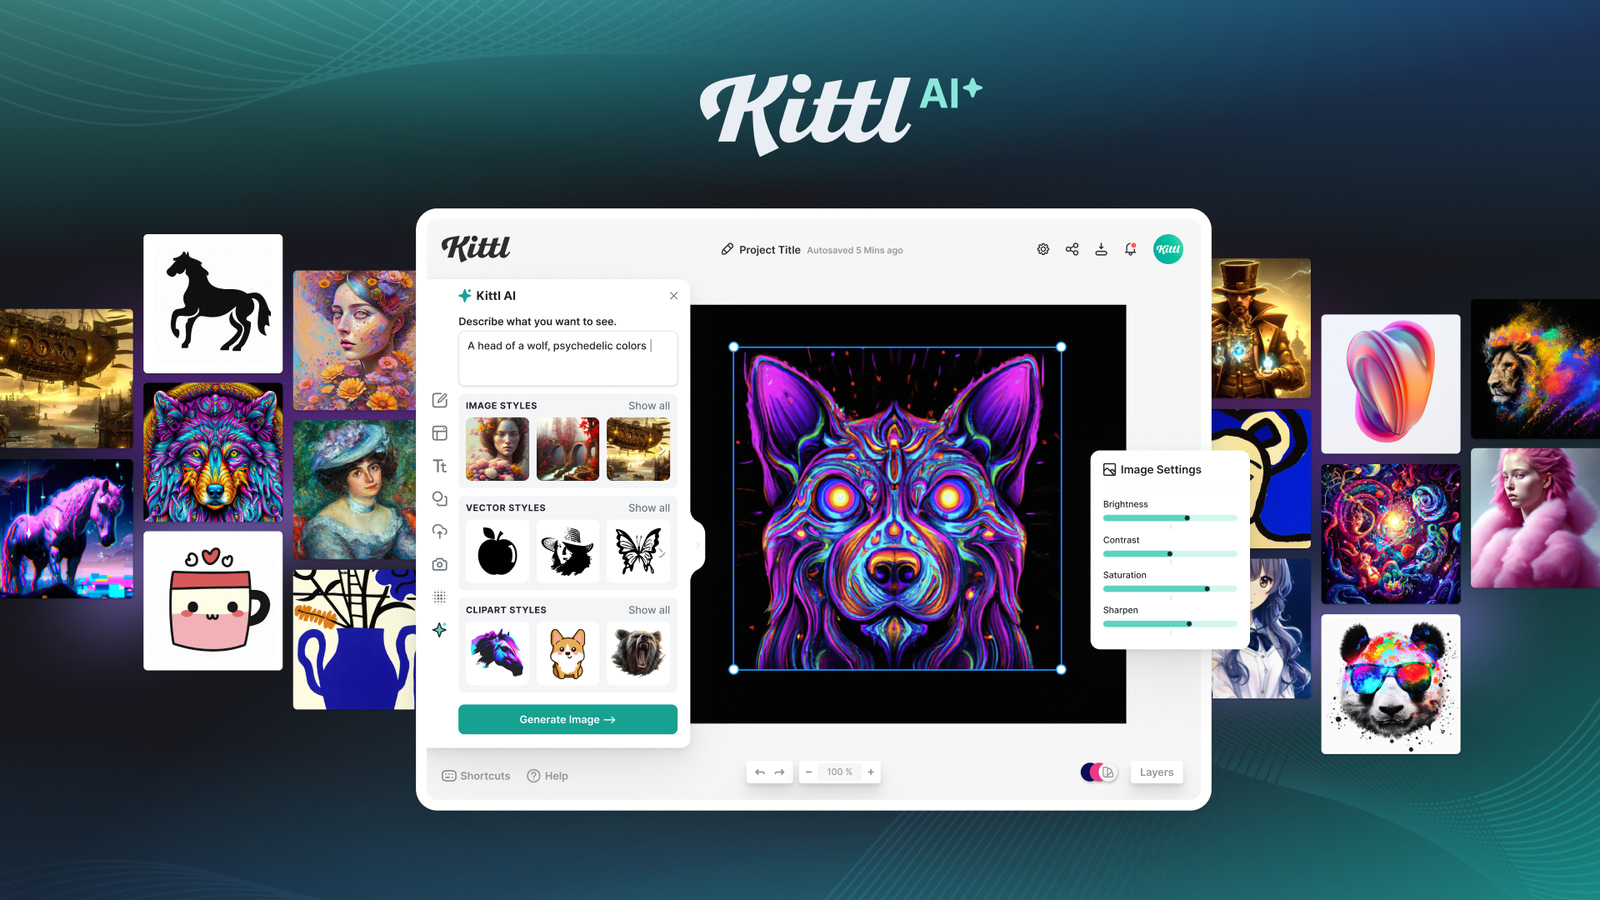  Investing in the Future of AI-aided Graphic Design with Kittl